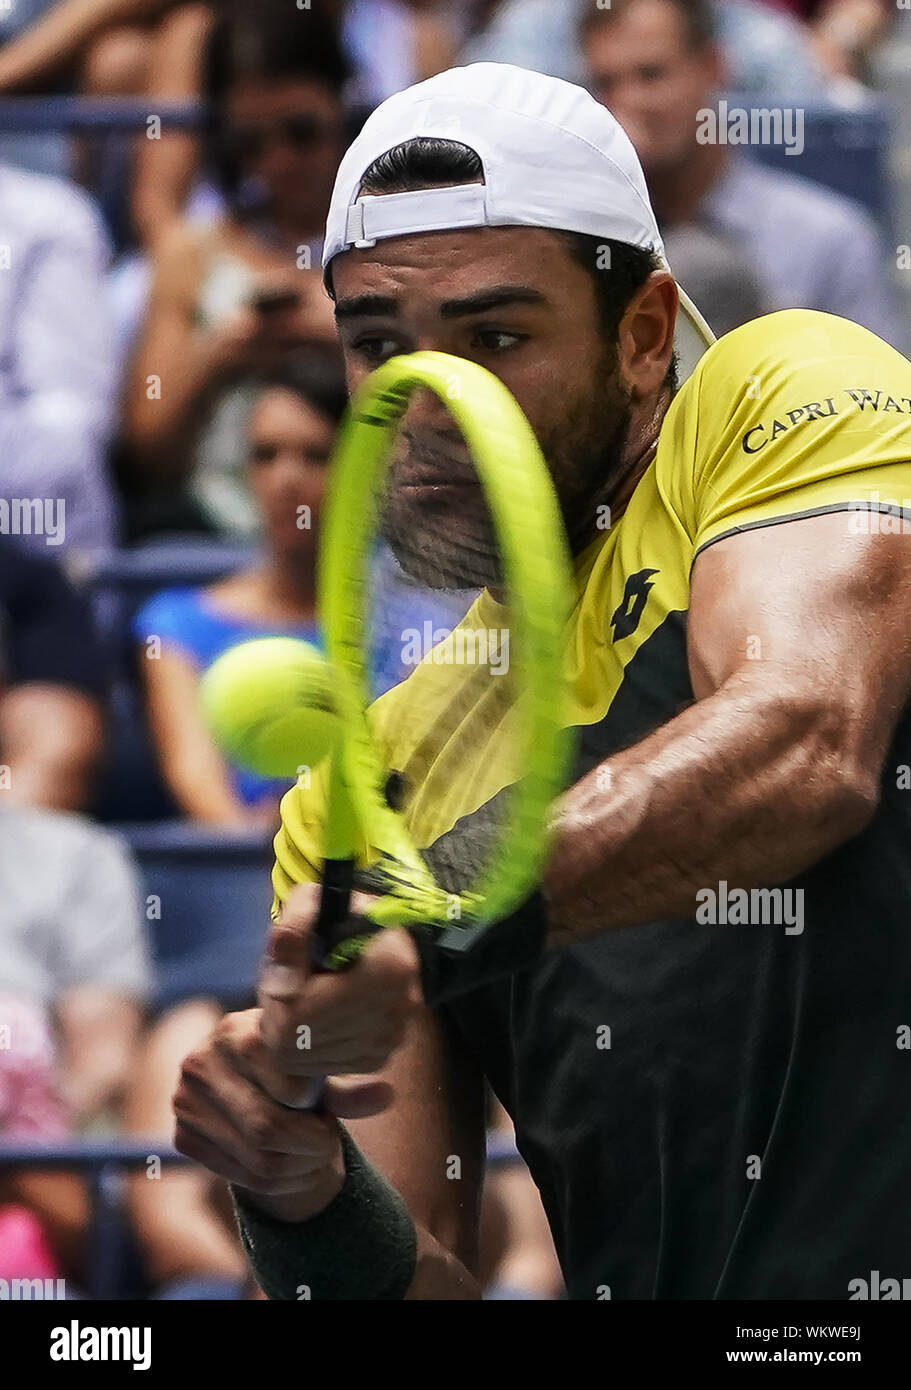 Matteo Berrettini, of Italy, returns to Gael Monfils, of France, during the quarterfinals of the U.S. Open tennis championships Wednesday, Sept